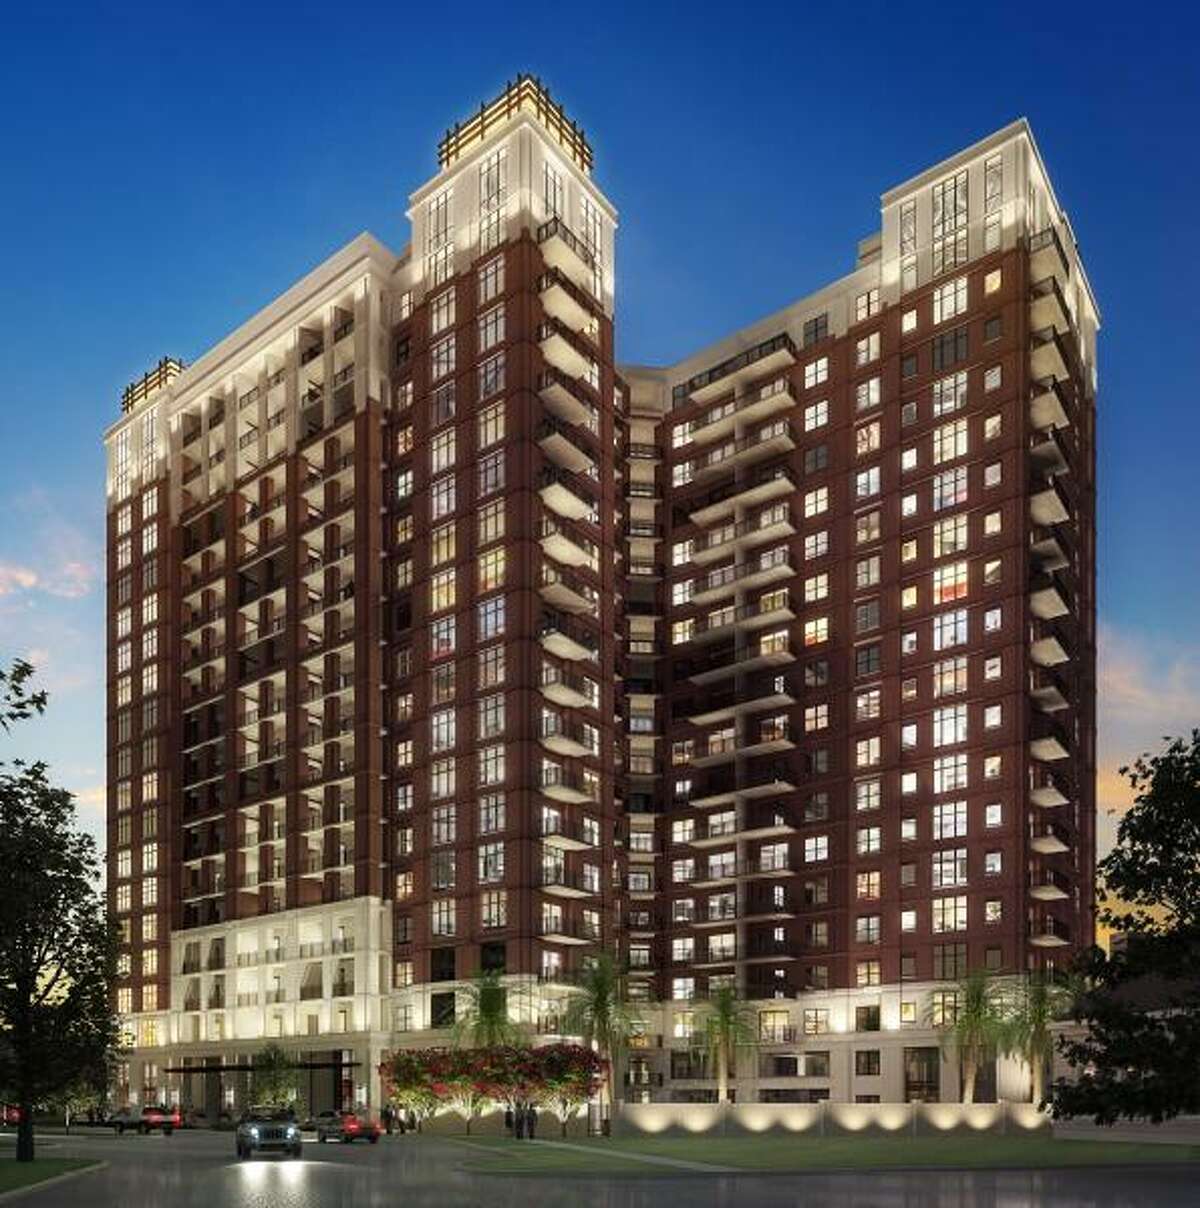 The Carter, shown in this rendering, is under con-struction on Chelsea Boulevard in the Museum District. It will have 305 apart-ments.﻿